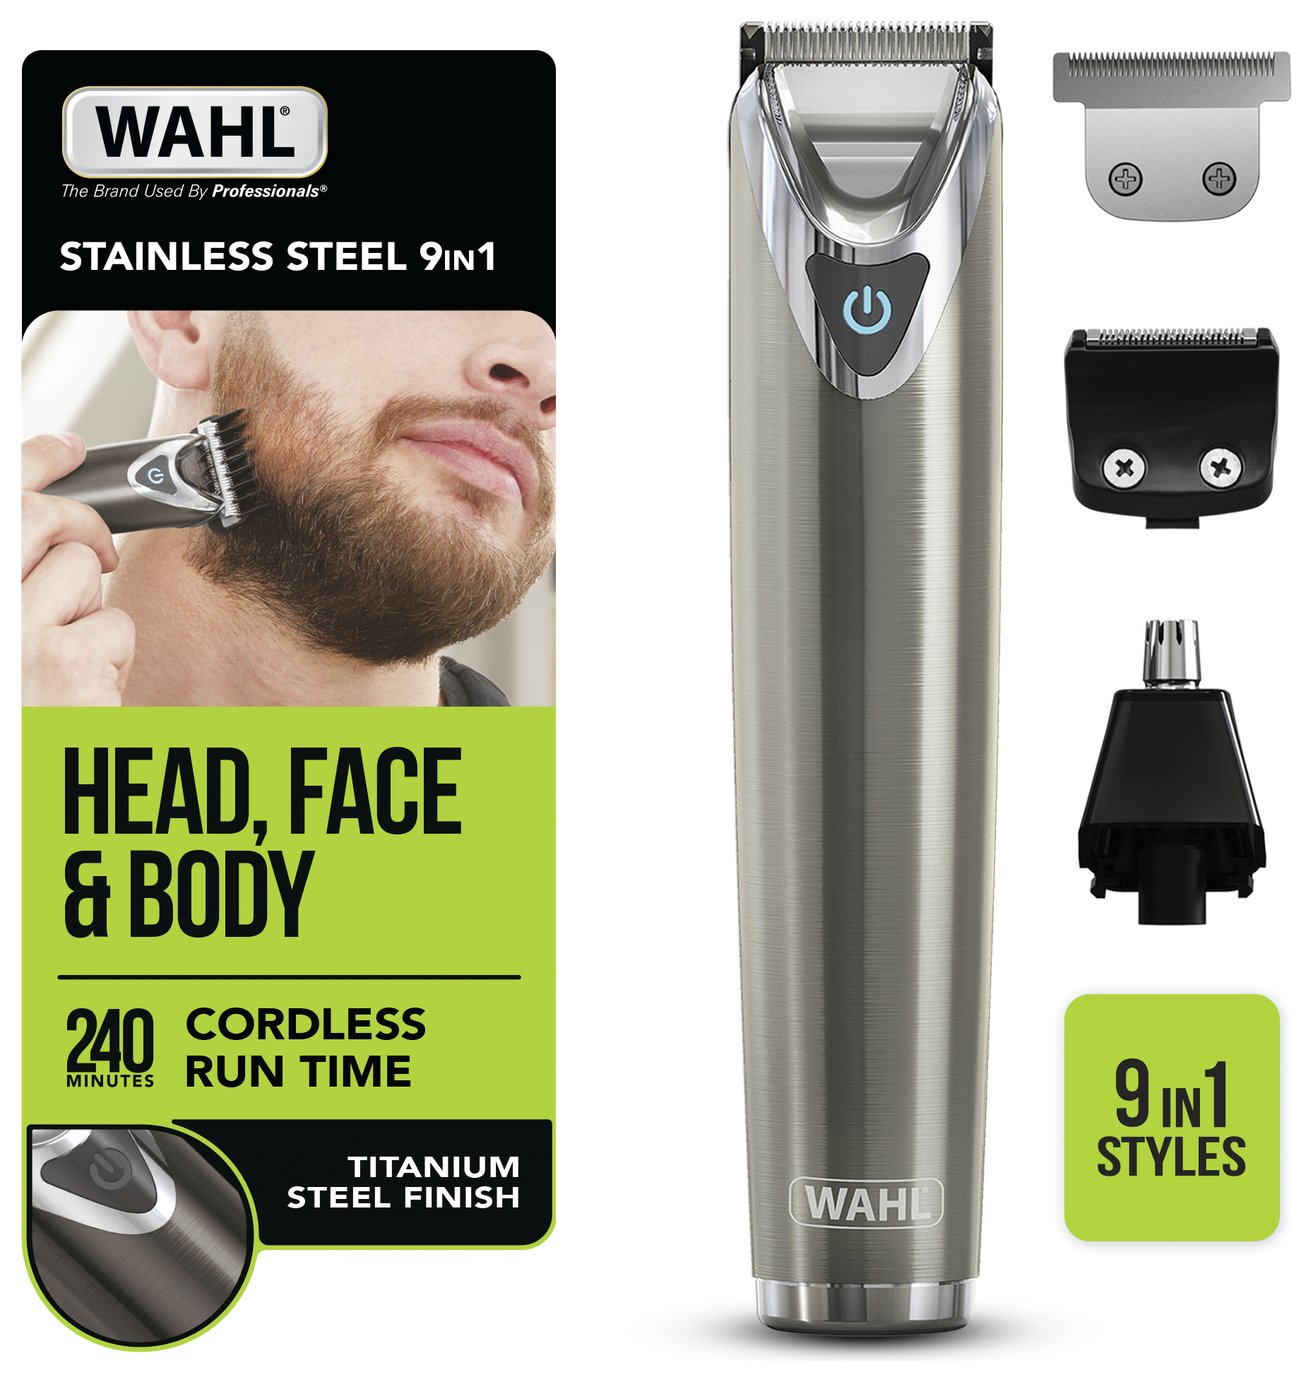 best lady shaver for intimate areas